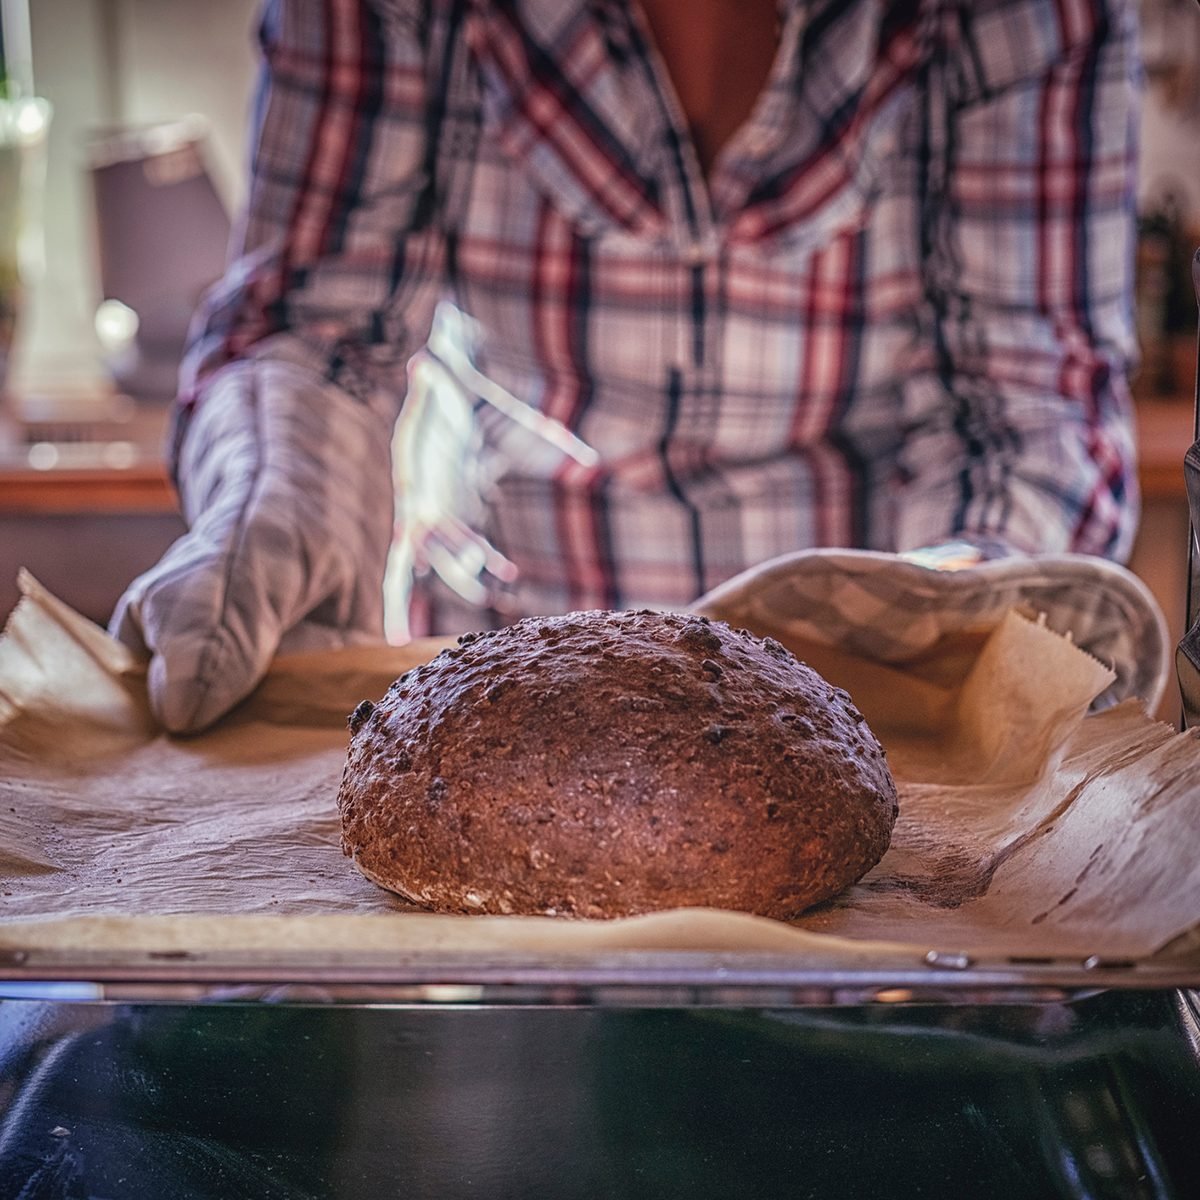 What temperature should you bake bread at? 